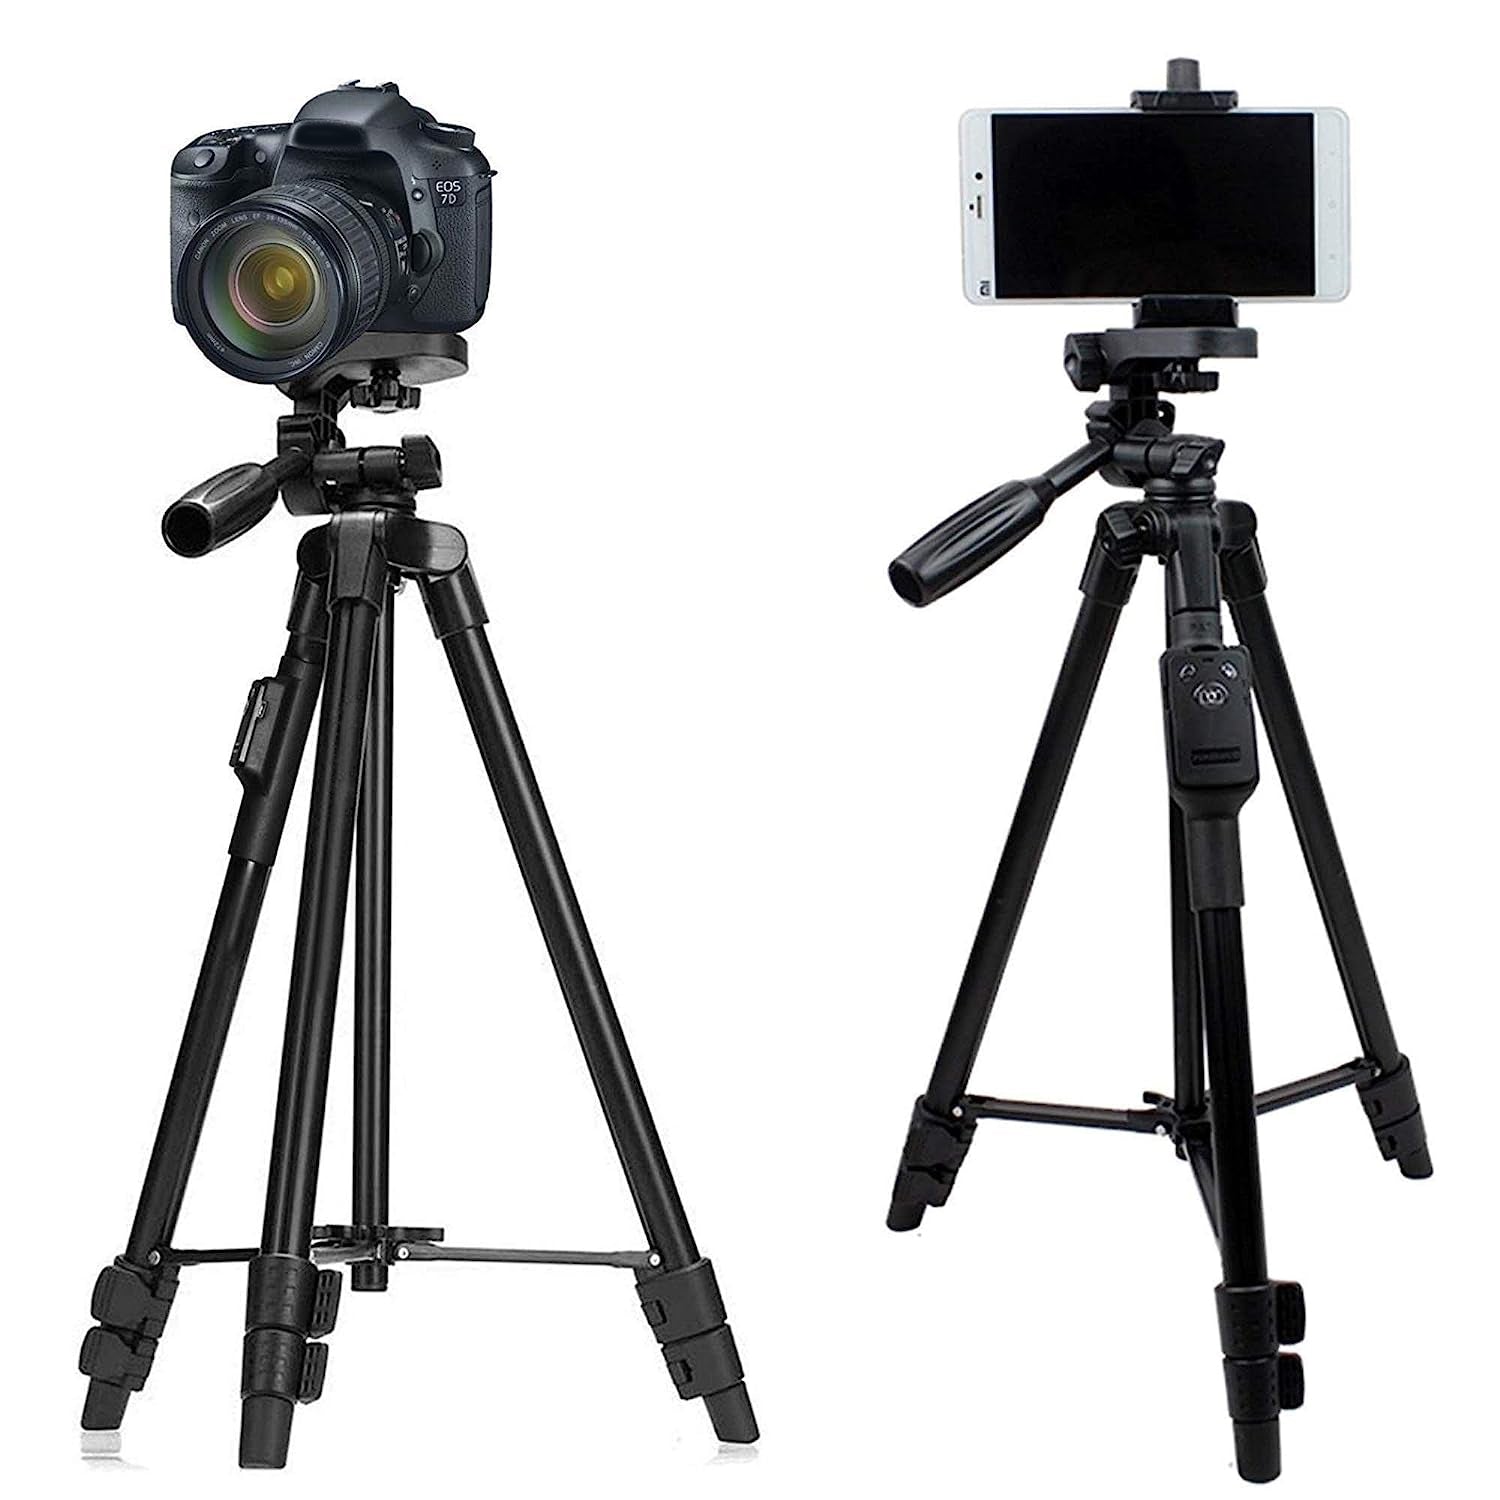 1466 Aluminum Alloy Tripod 3120A Stand Holder for Mobile Phones & Camera Tripod Kit